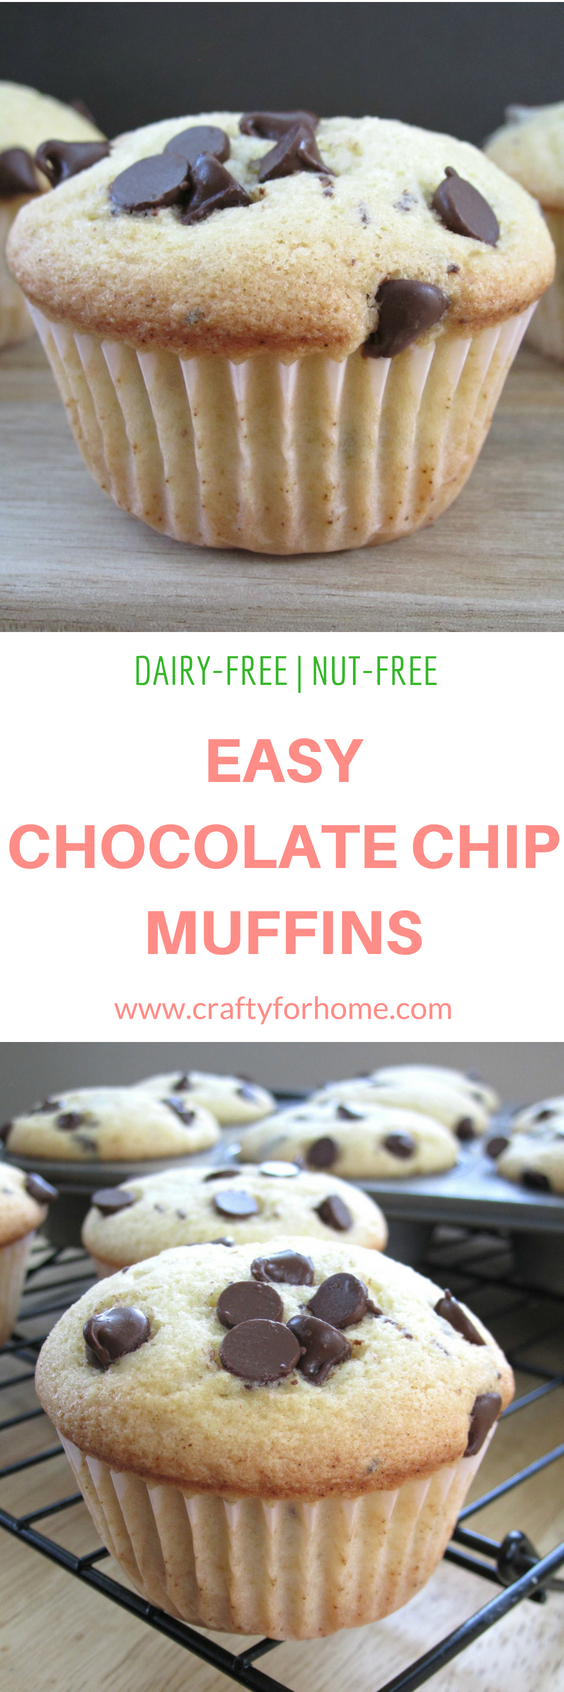 Easy Chocolate Chip Muffins, this chocolate chip muffin recipe is dairy-free, quick and easy without butter perfect for snack or breakfast. It is a soft muffin with the crusty on top. #chocolatechipmuffins #dairyfreemuffins #easychocolatechipmuffins #quickmuffins get the recipe on www.craftyforhome.com